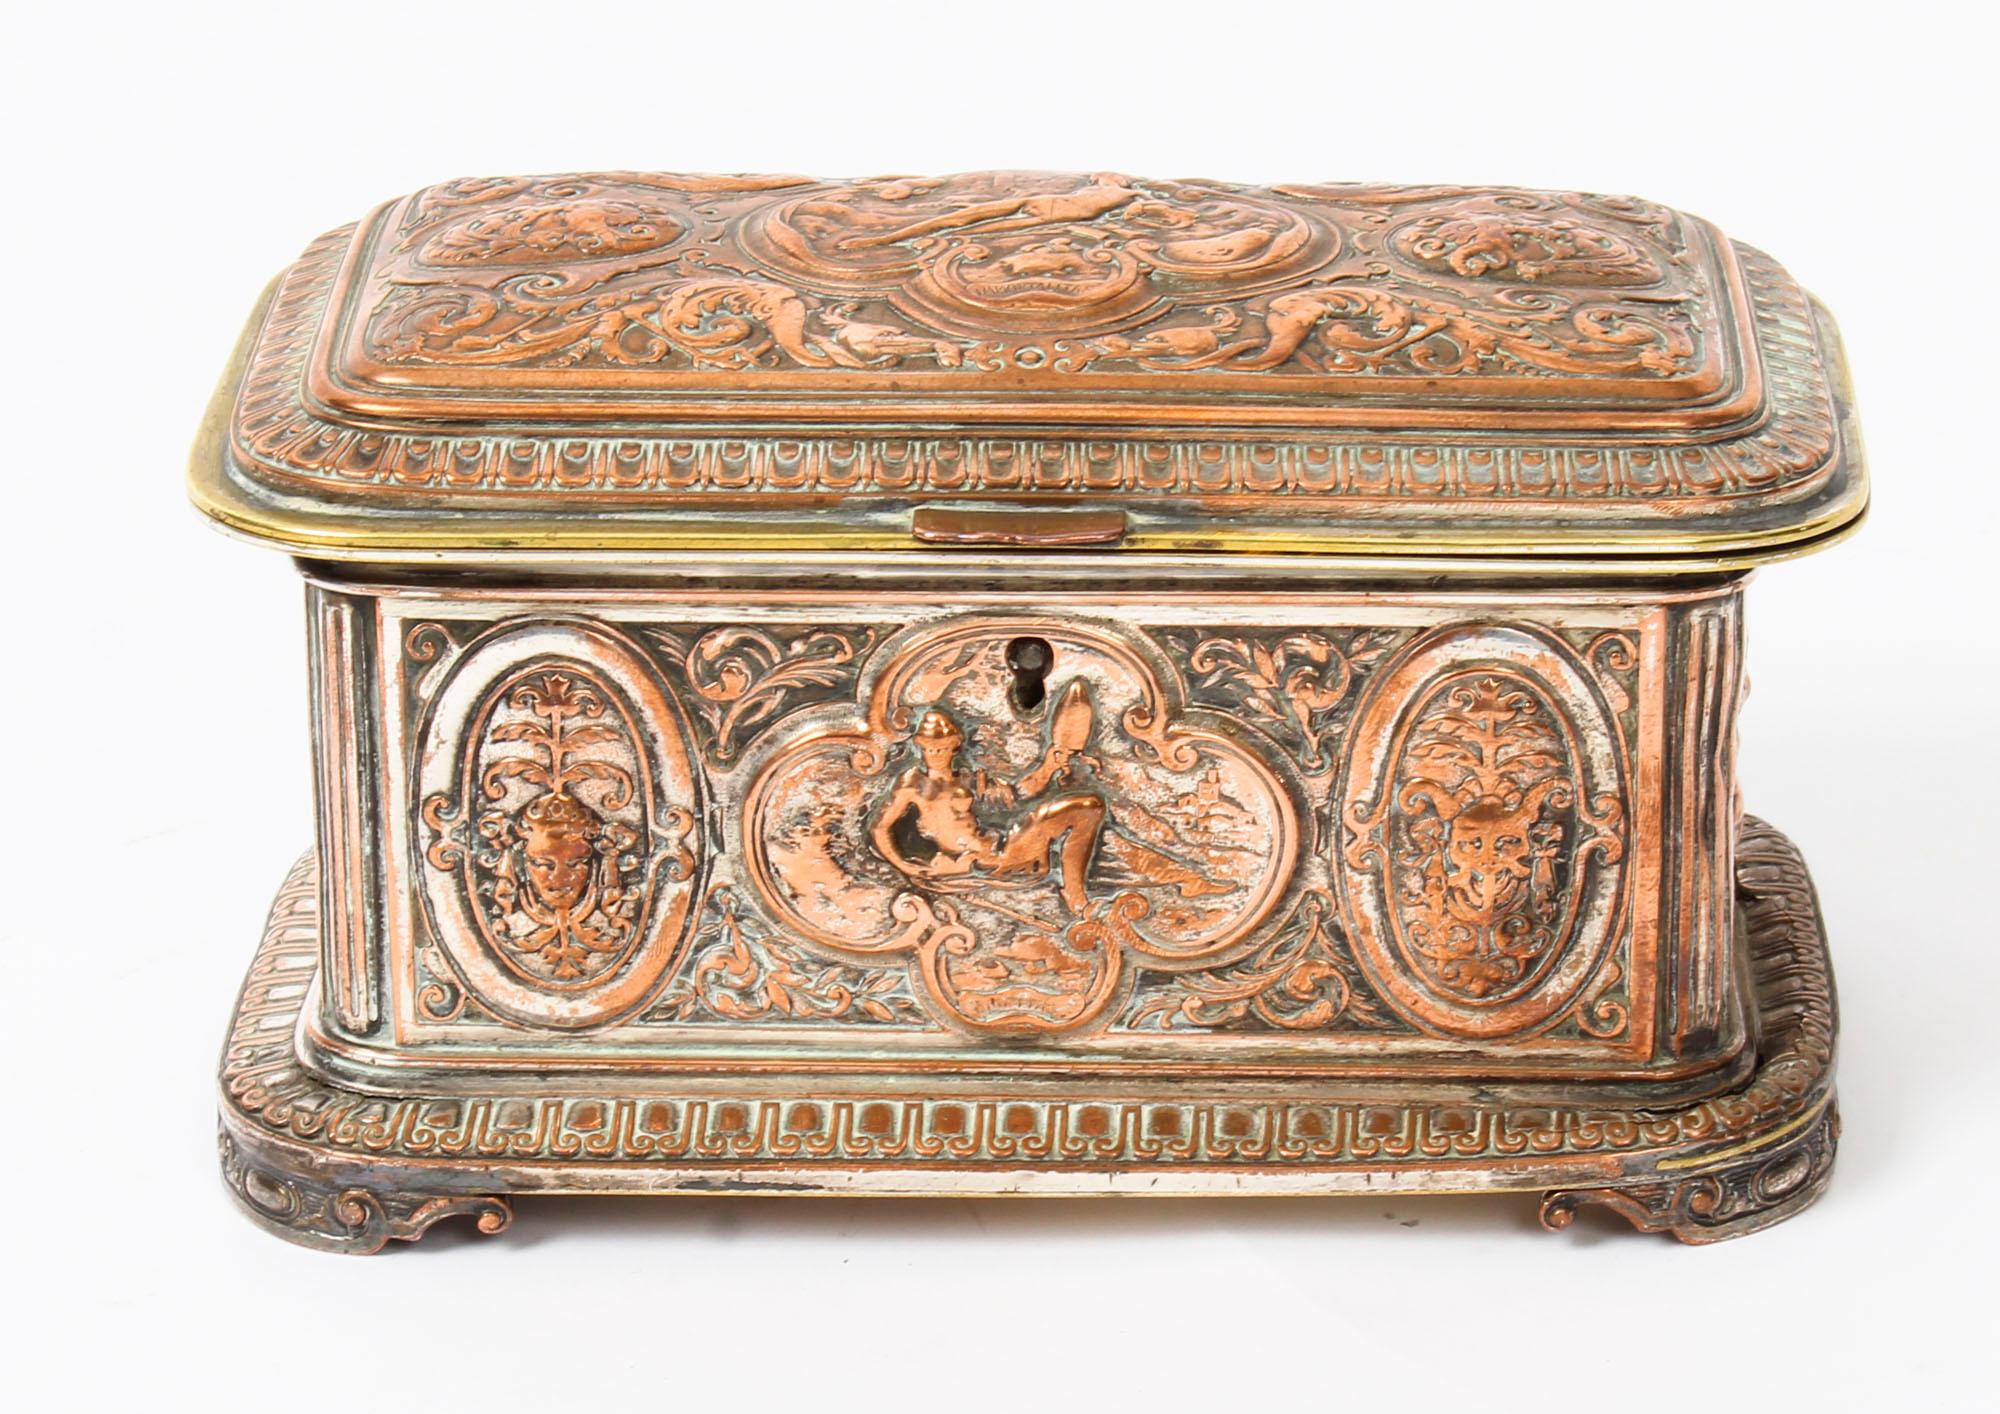 A beautiful Victorian gilt and silver plated copper jewellery casket in the manner of Elkington, date: circa 1870.
 
The rectangular casket features superb cast plaques which feature reclining nudes with masks and is raised on corner ribbon